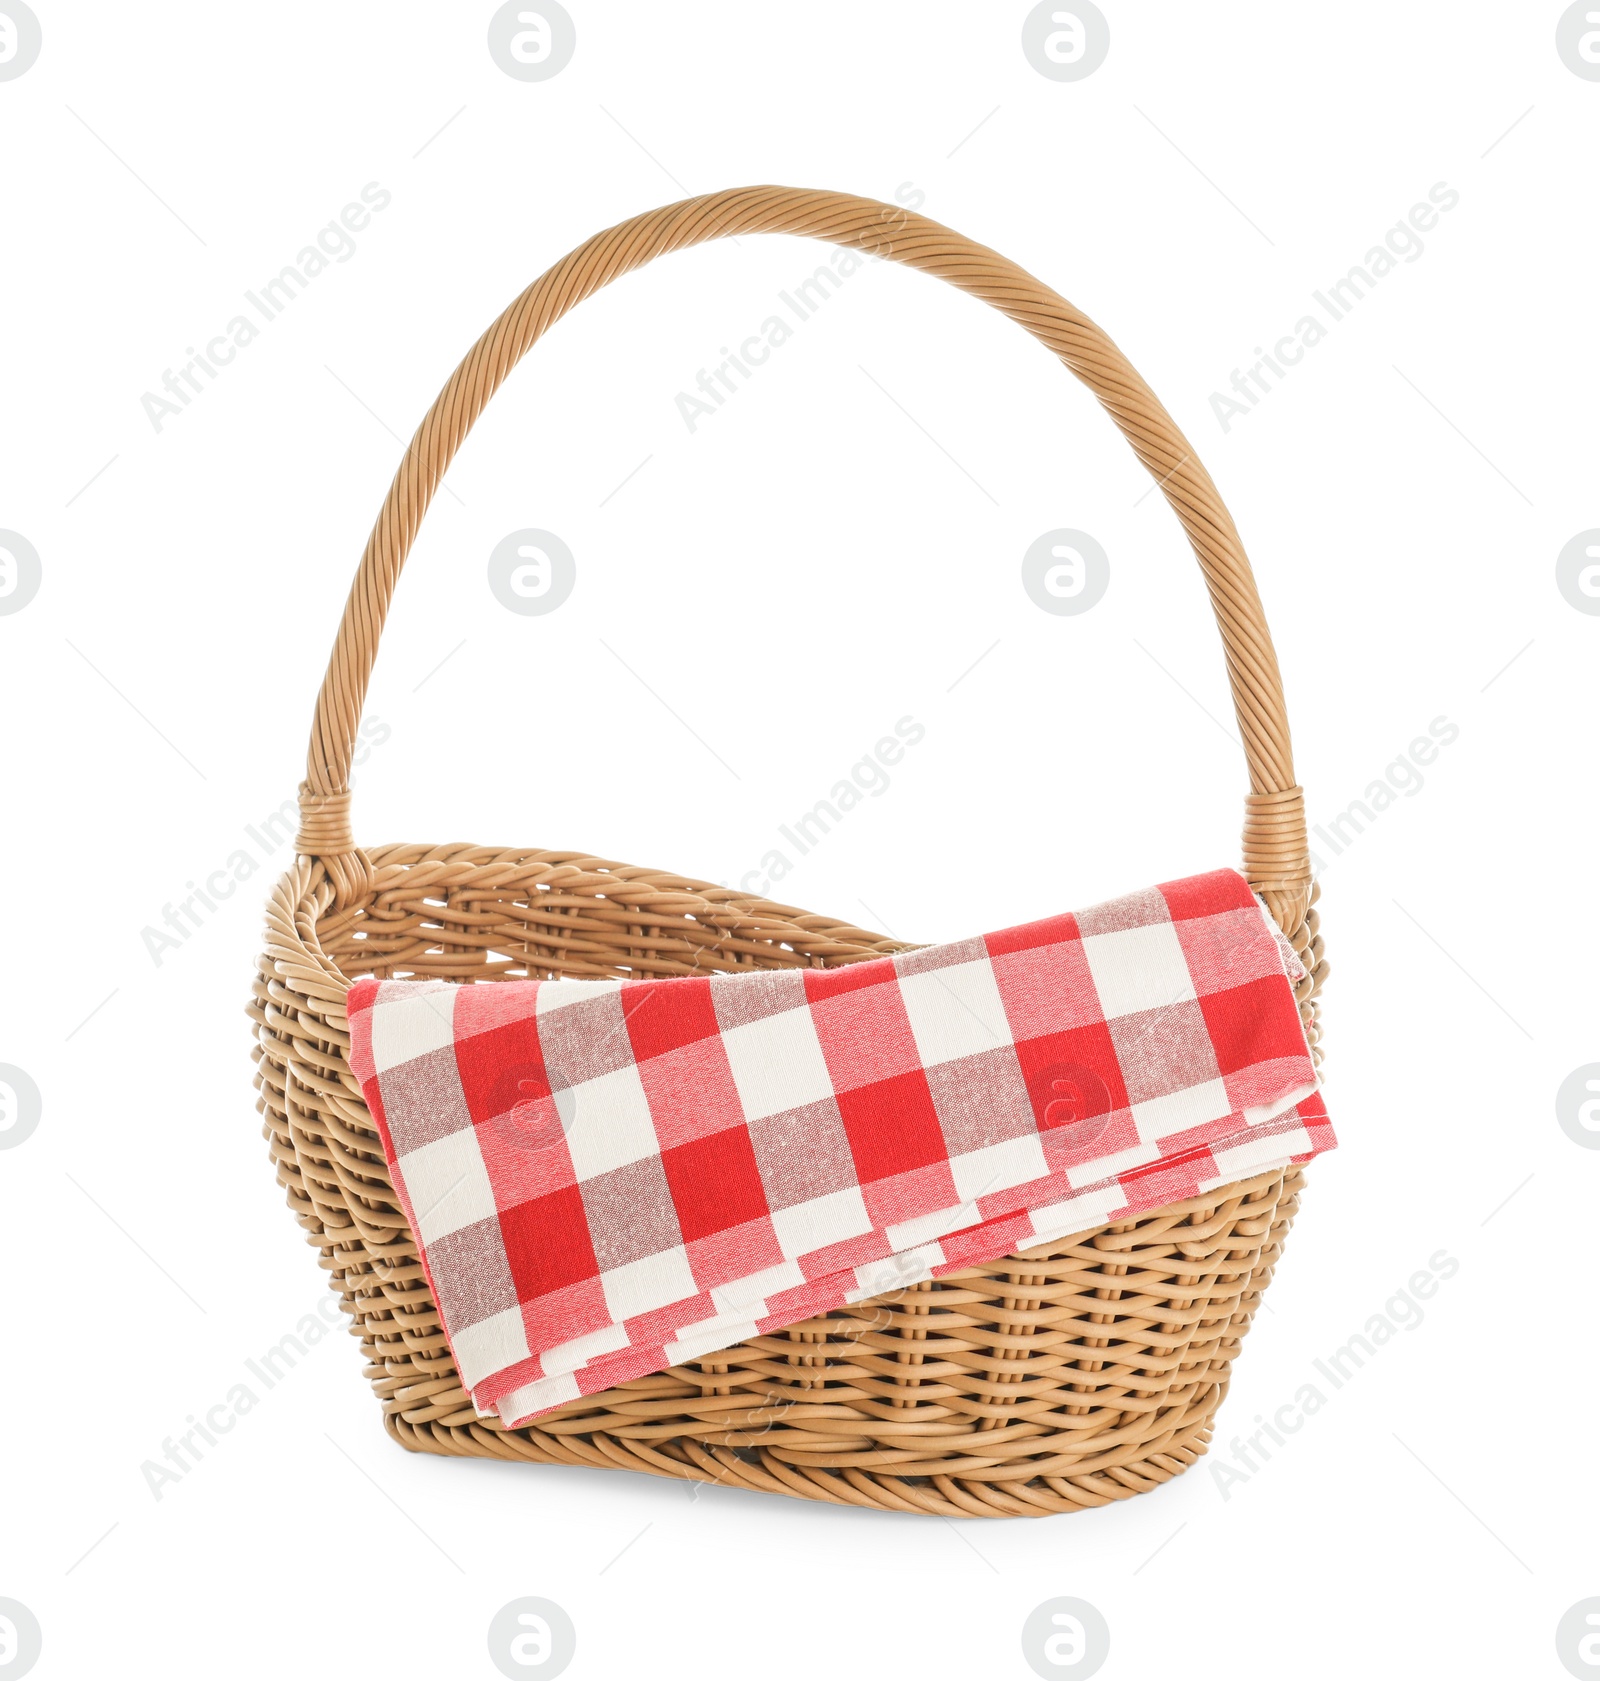 Photo of Wicker picnic basket with checkered blanket on white background